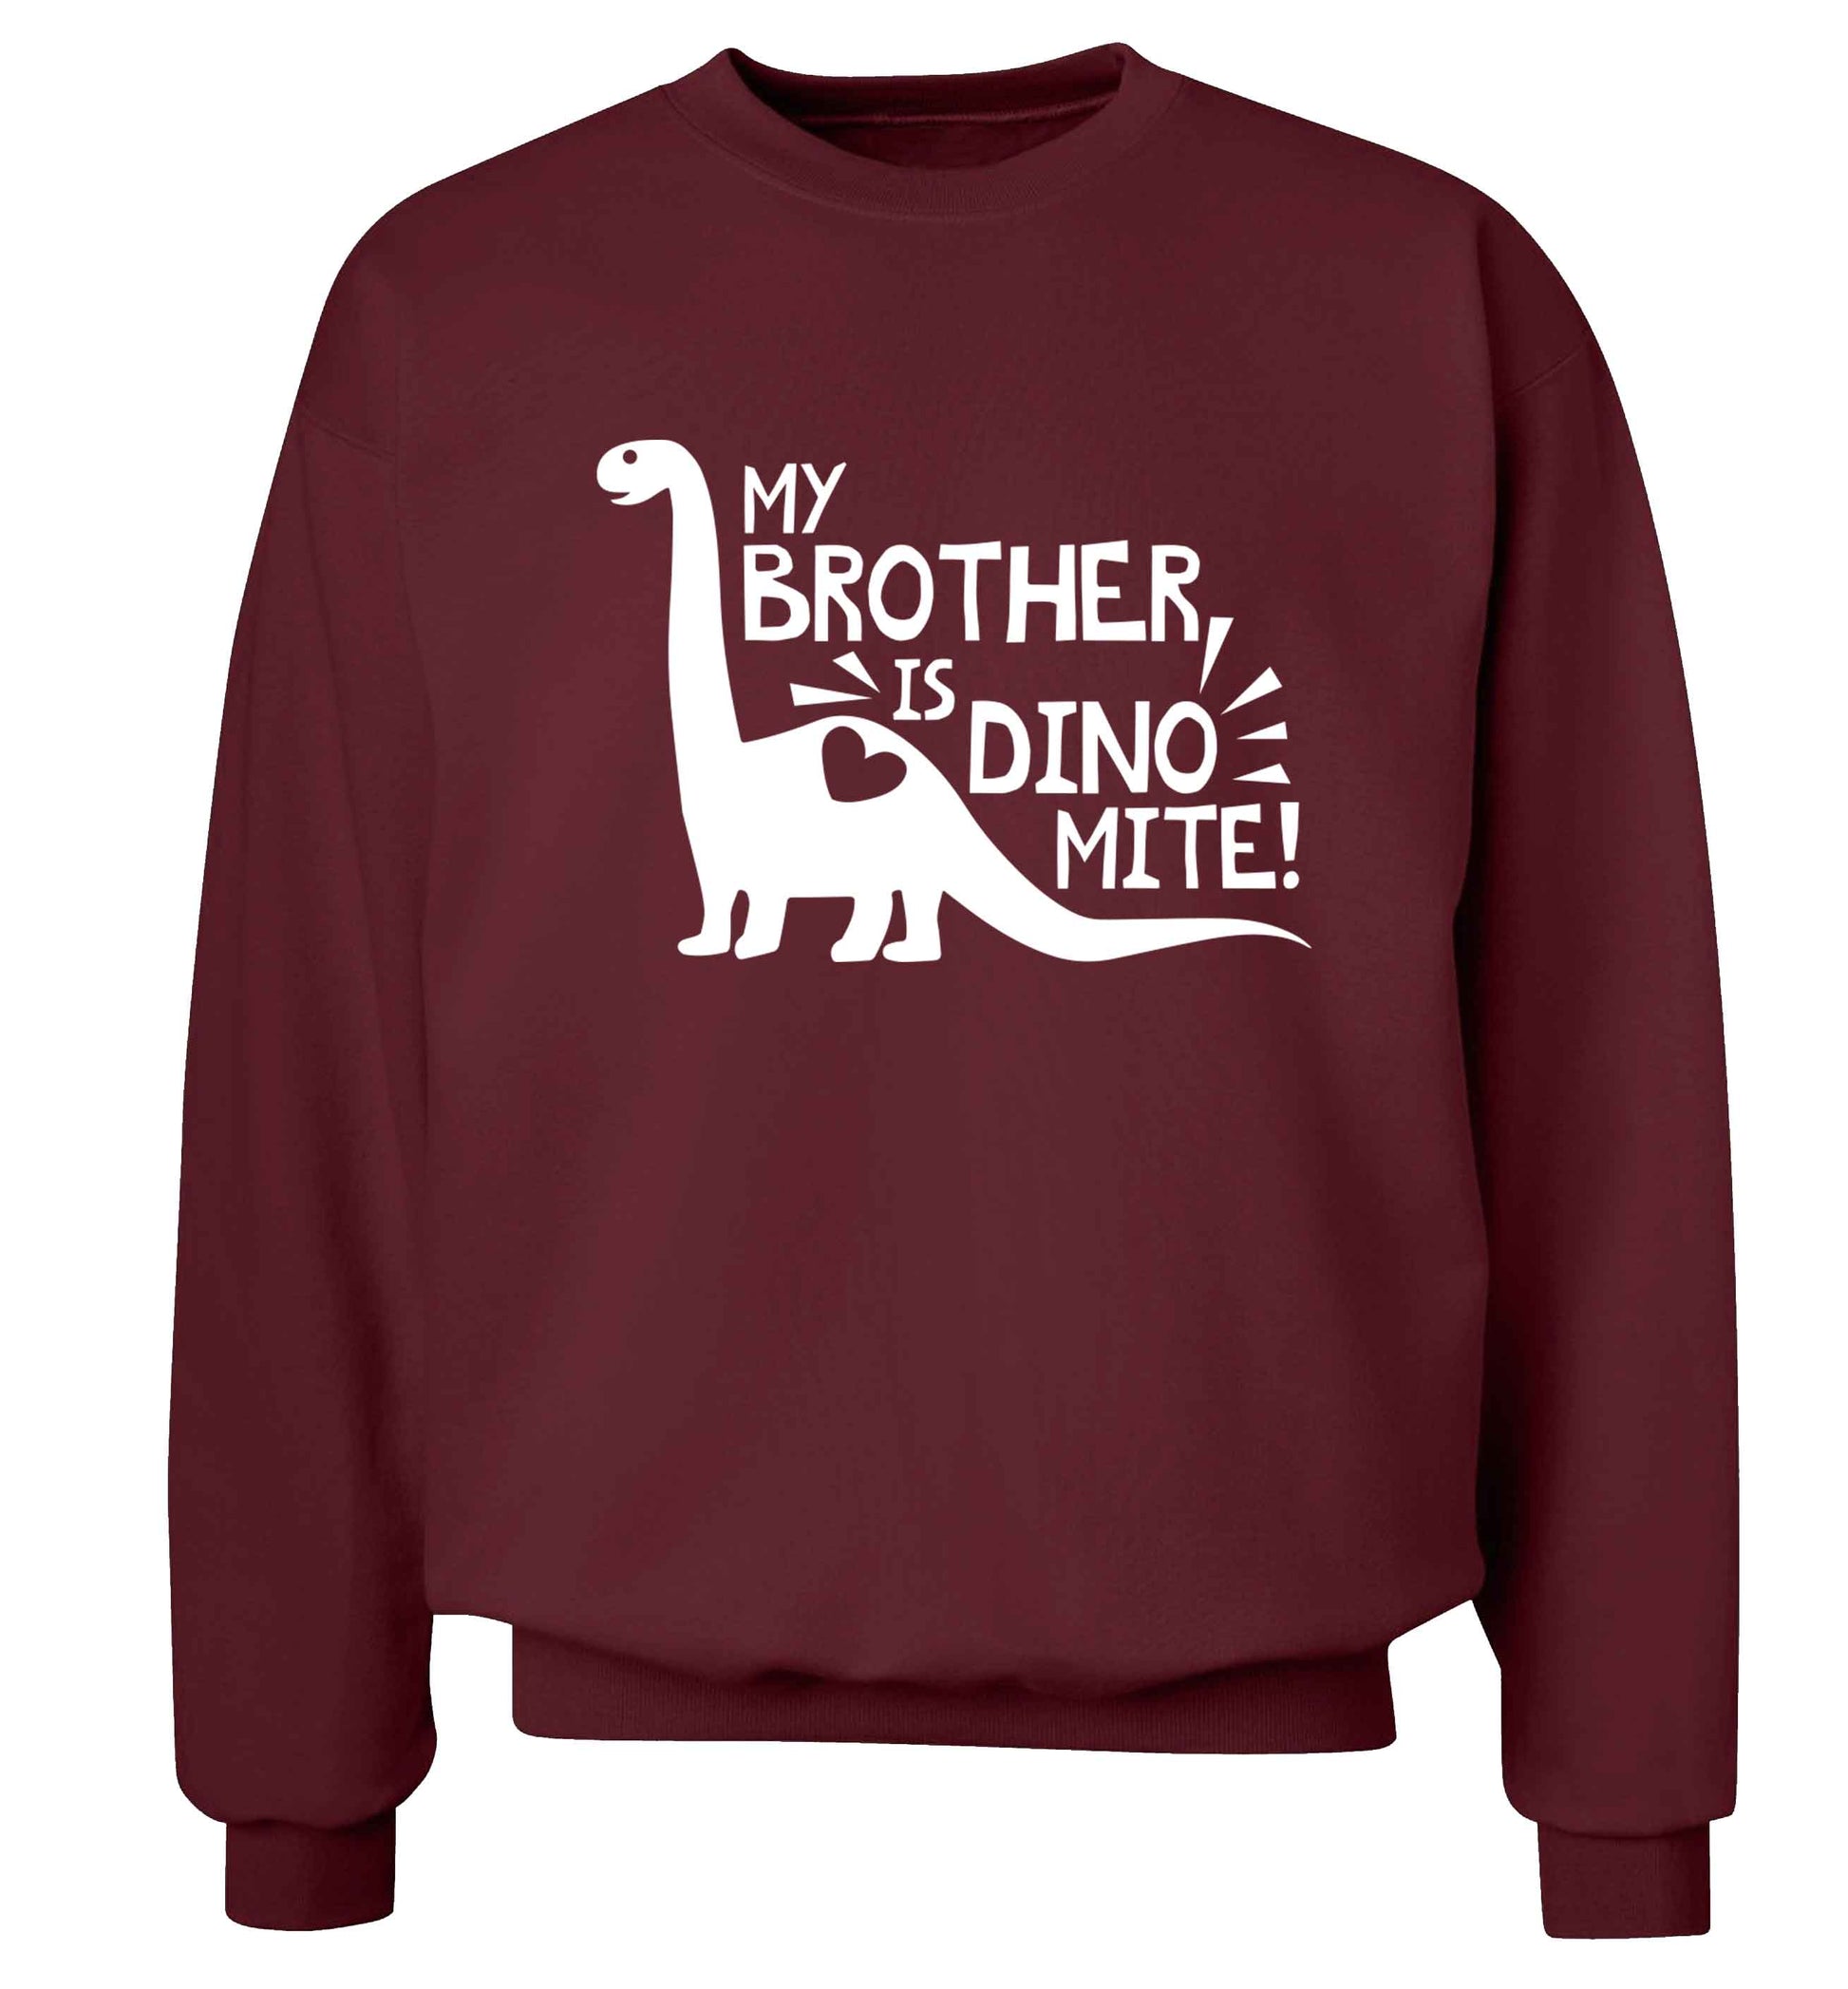 My brother is dinomite! Adult's unisex maroon Sweater 2XL